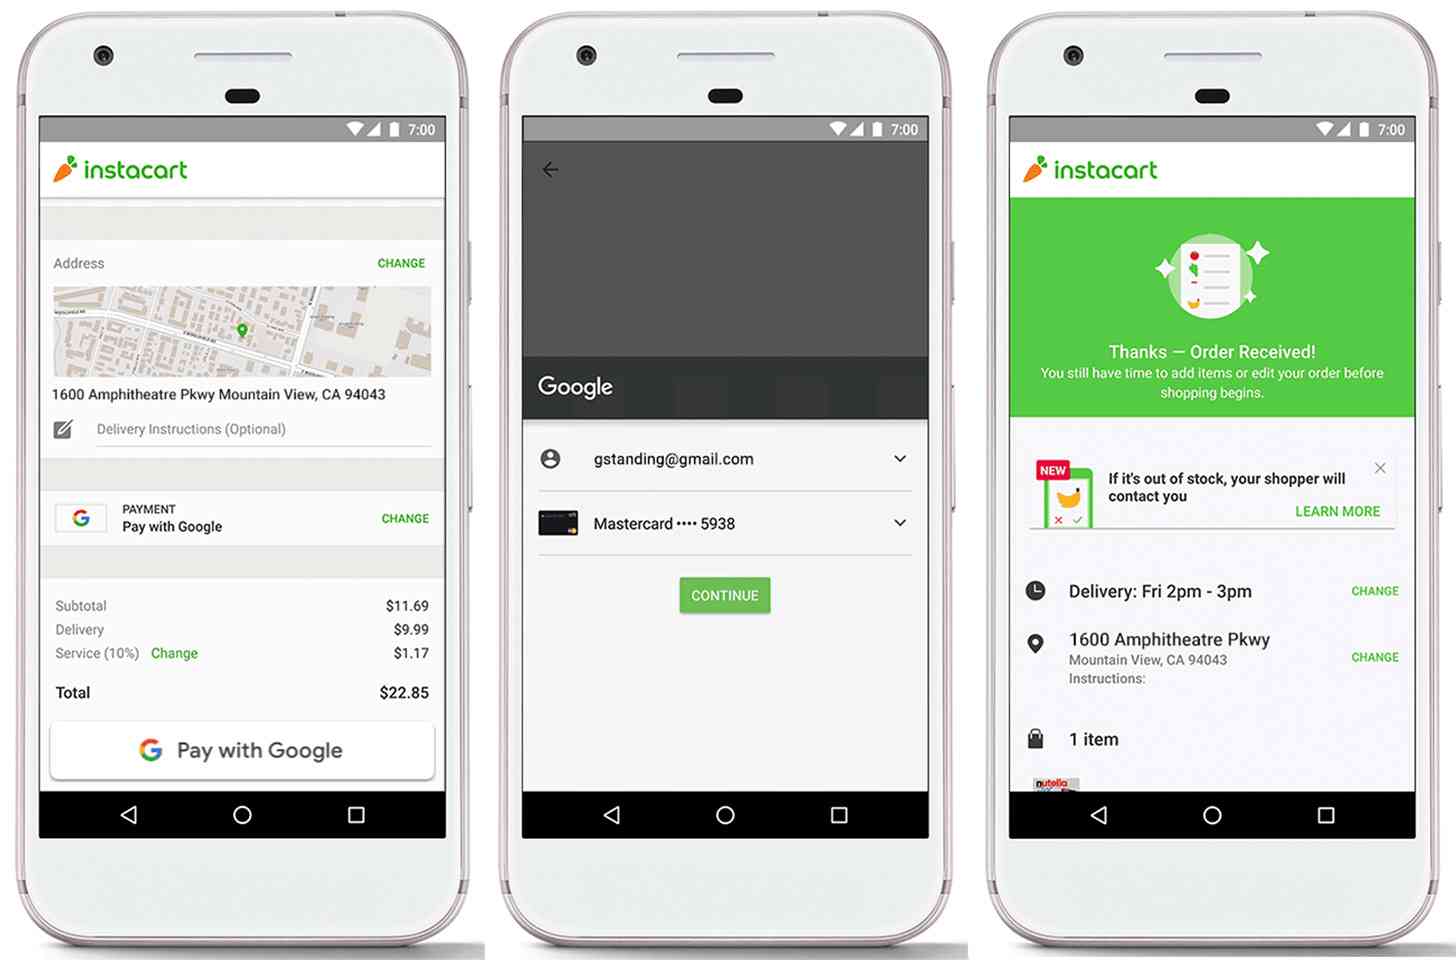 Pay with Google steps Android phone